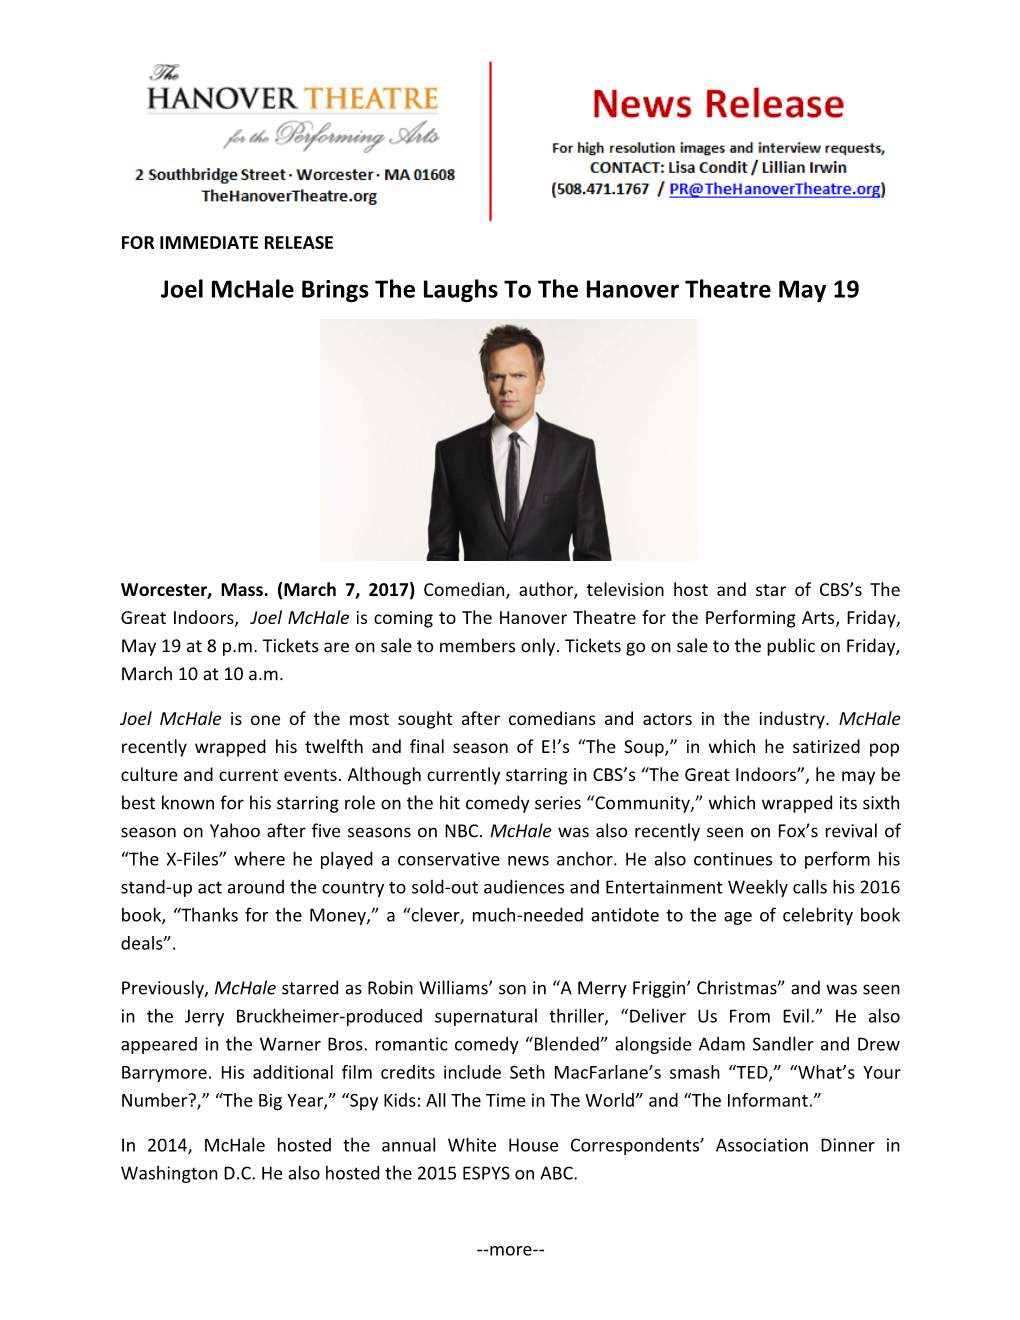 Joel Mchale Brings the Laughs to the Hanover Theatre May 19